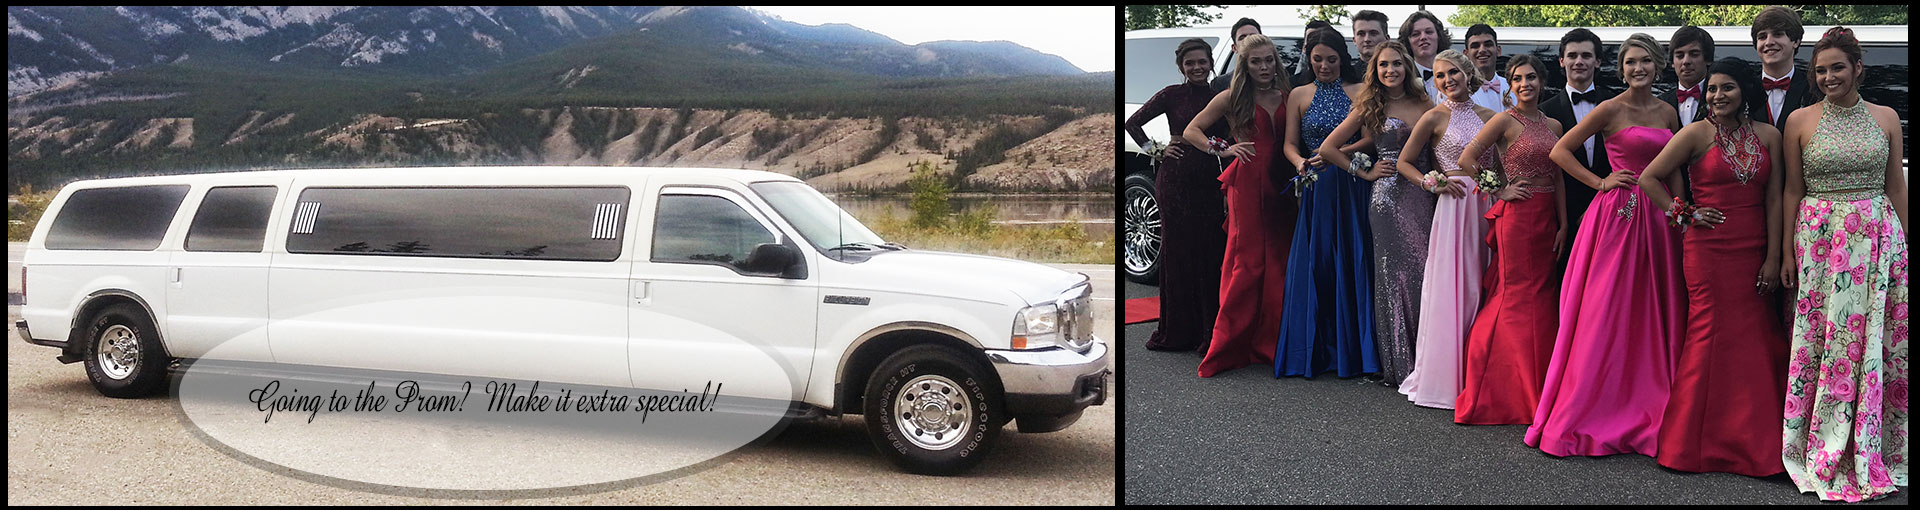 Make memories for your special graduation celebrations by booking a limo from Accent Limousine in Kelowna, BC.